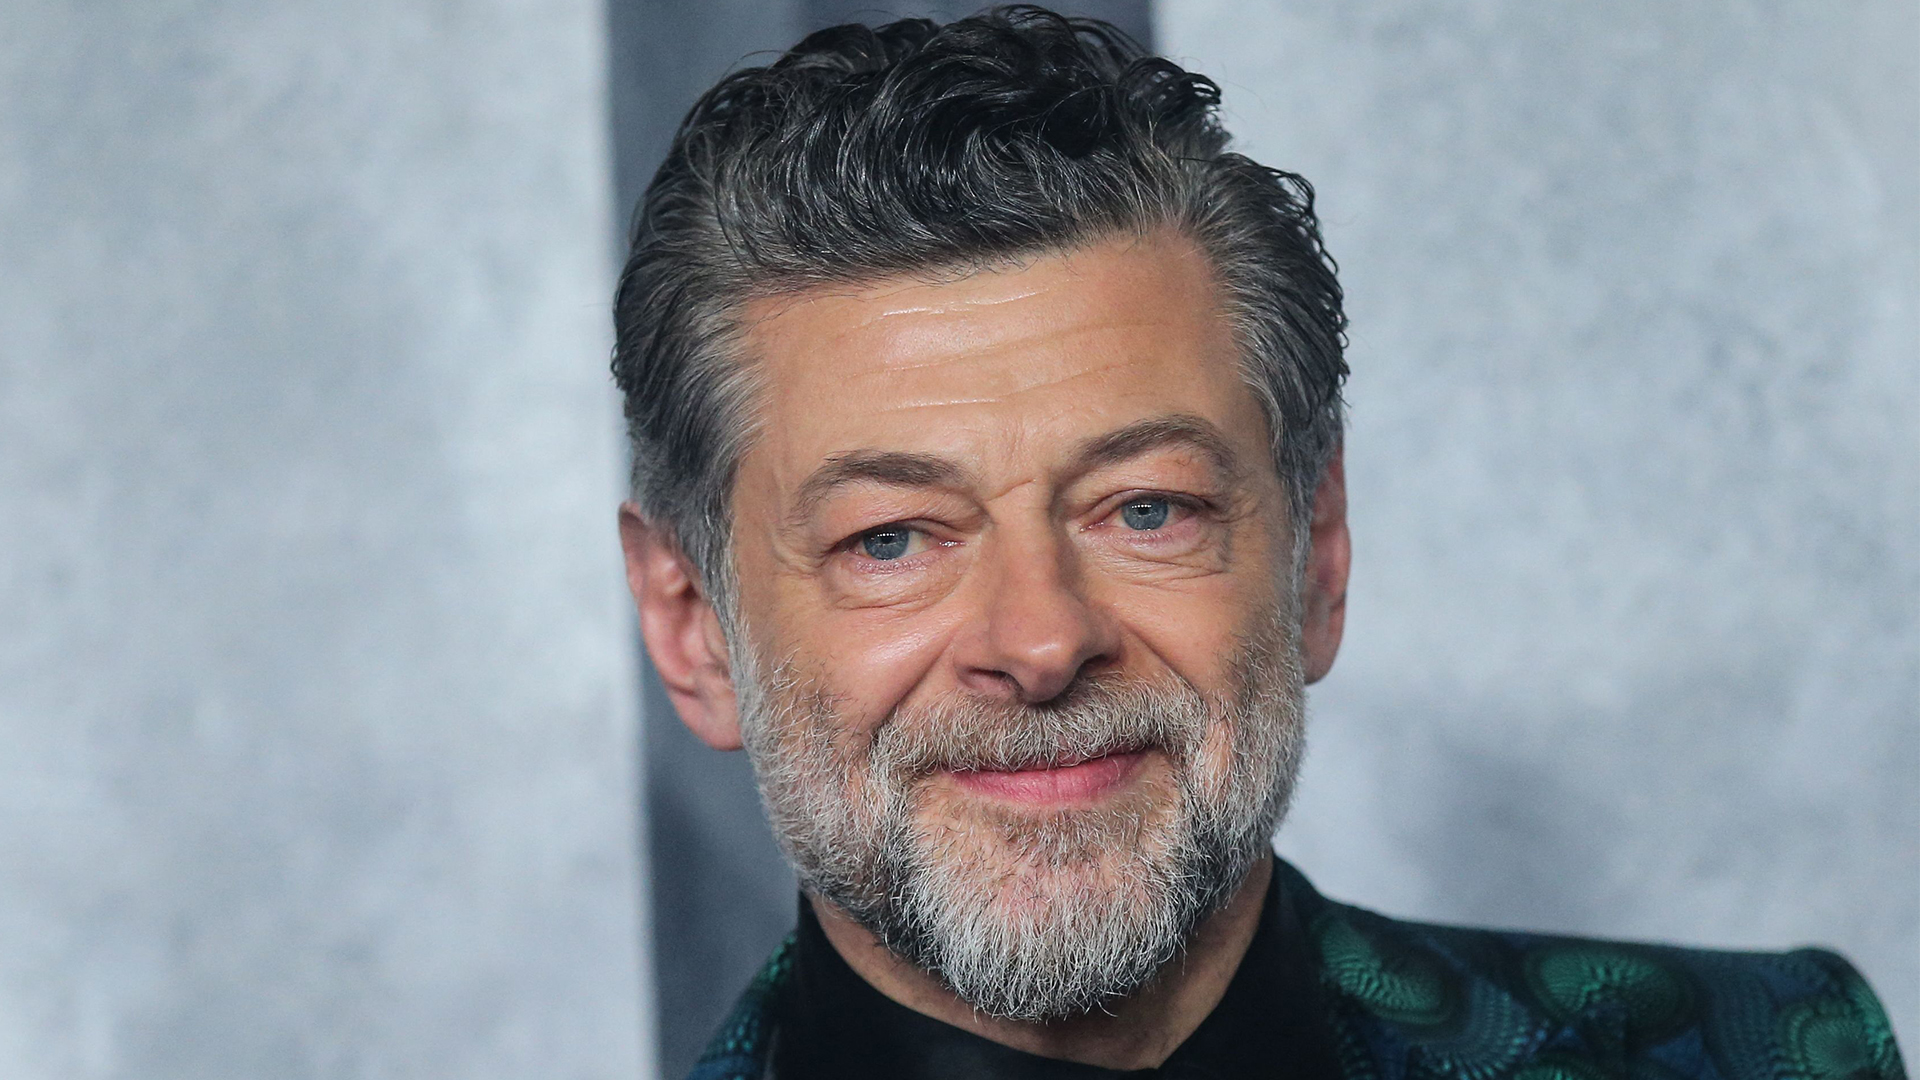 Kingdom of the Planet of the Apes star reveals Andy Serkis' secret role in the new movie